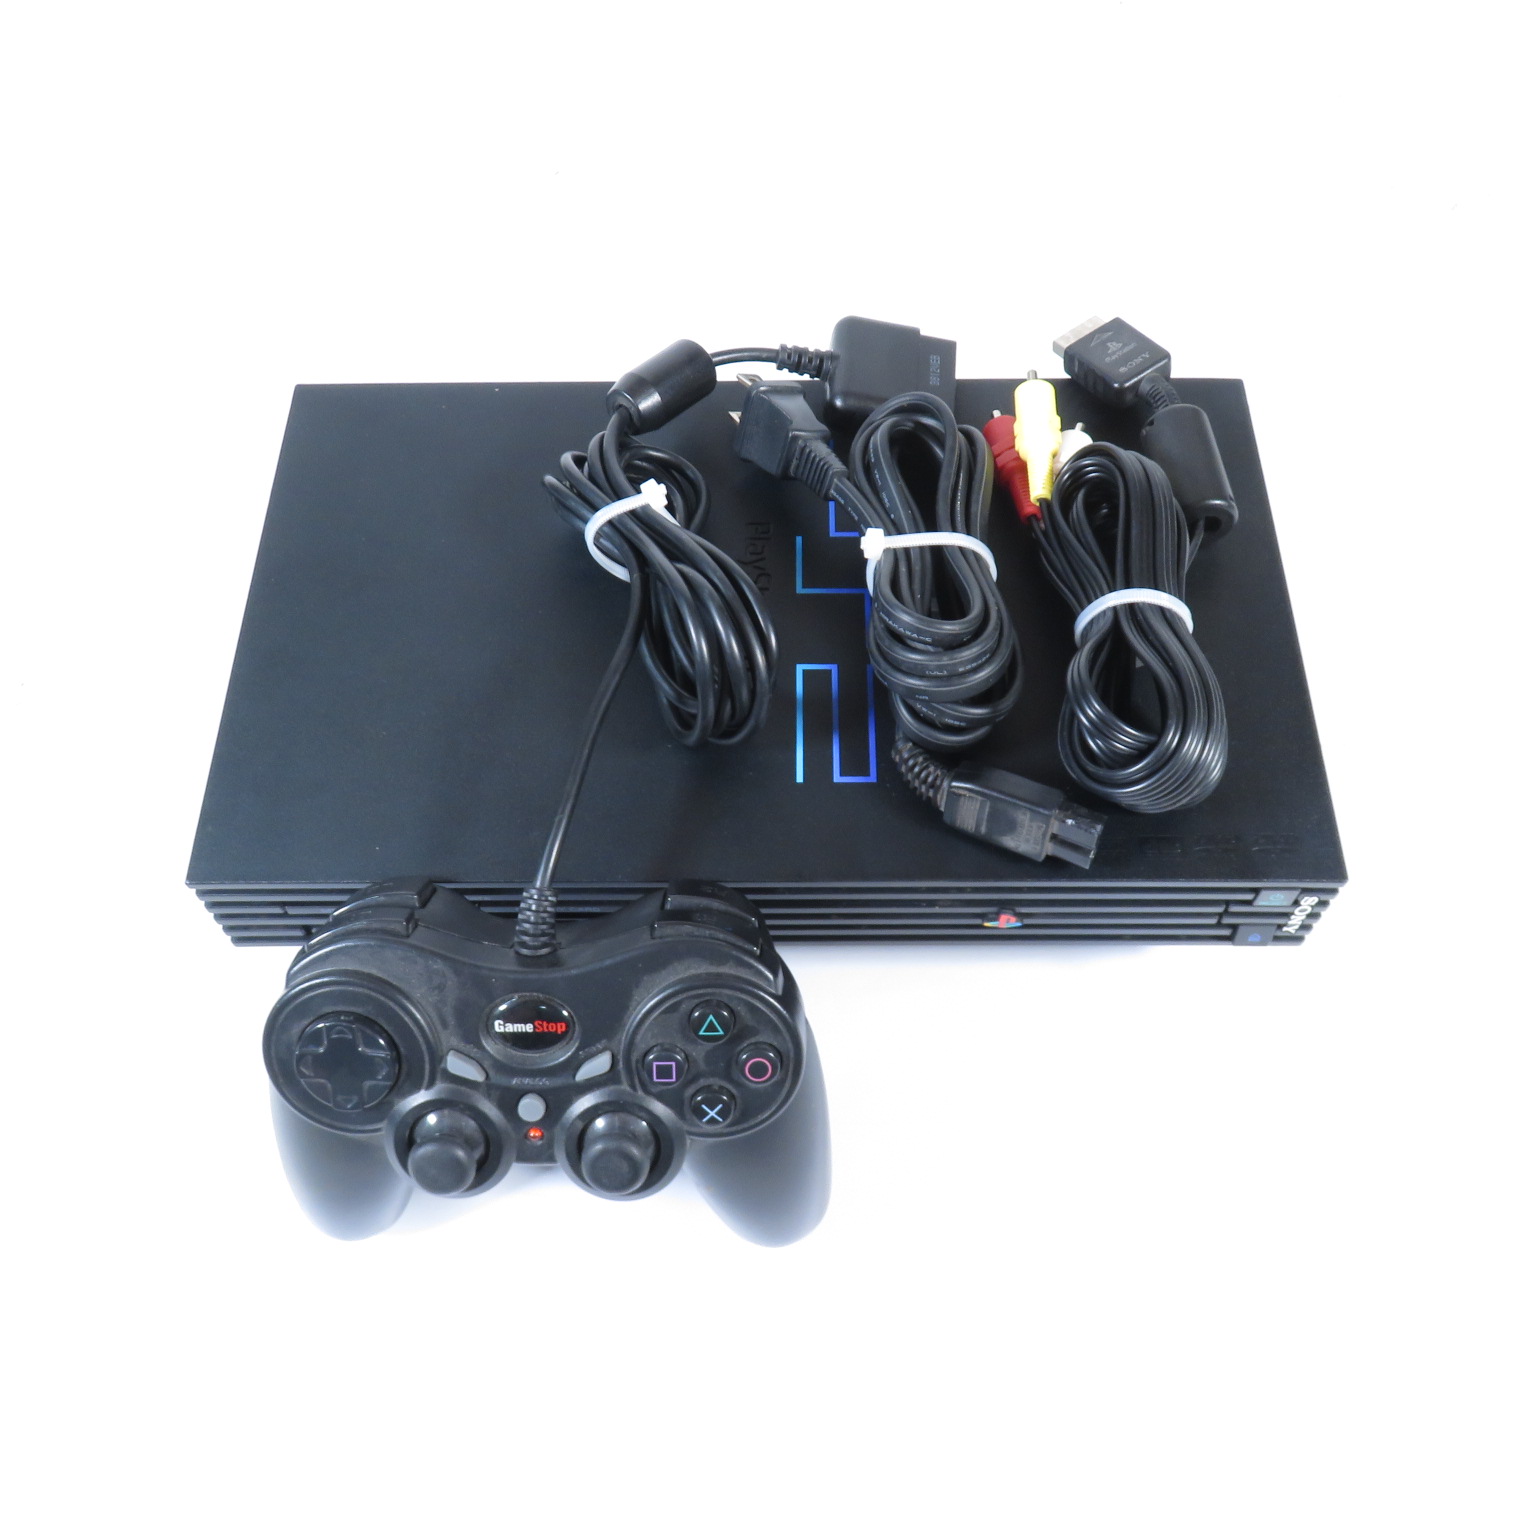 Sony PlayStation 2 Console Black (SCPH-39001) With Power Cord